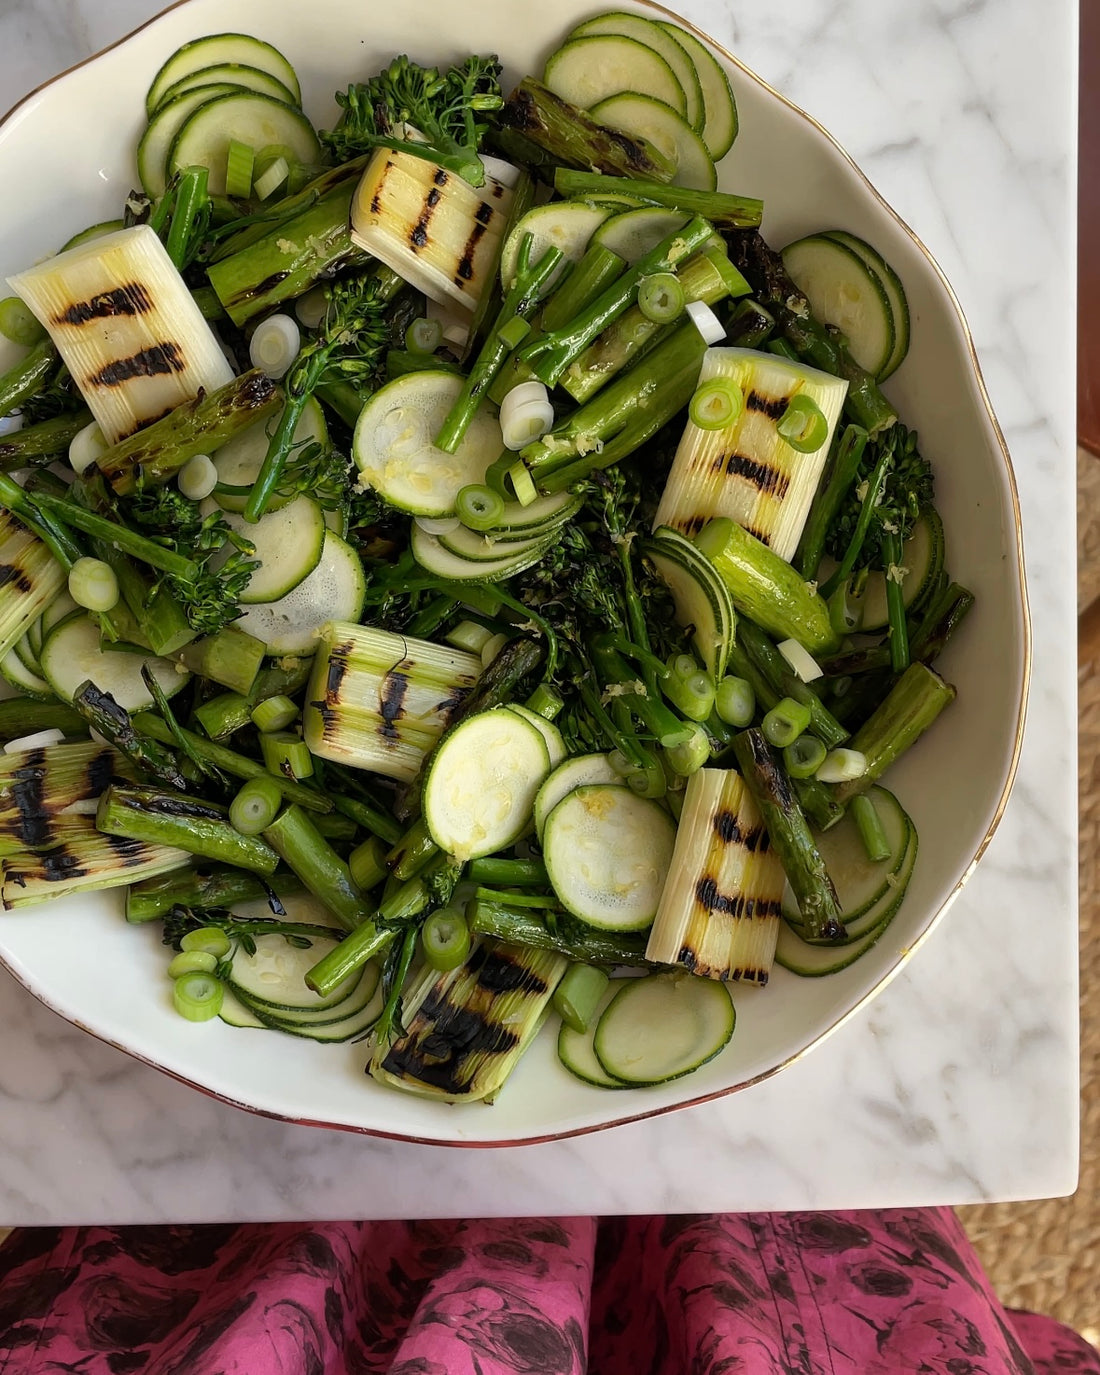 Spring vegetable salad with ingredients. @intothesauce, Into the Sauce, Tori Falzon, #intothesauce